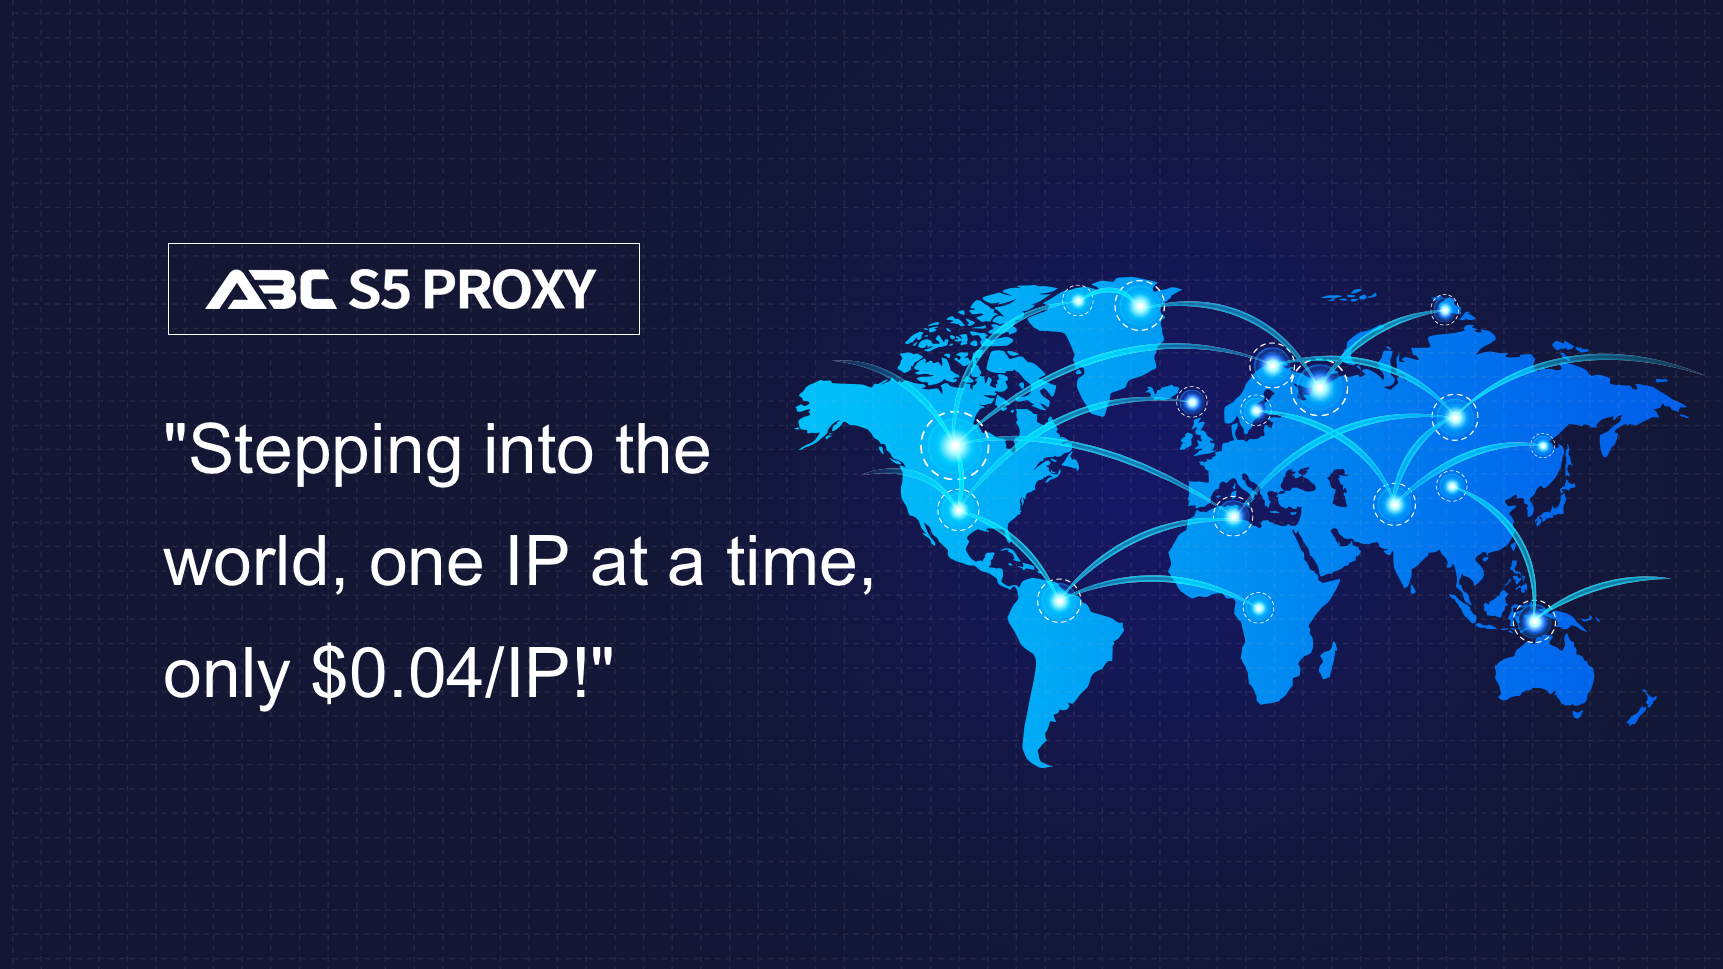 🌟 Introducing ABCproxy: Your Ultimate Residential Proxy Solution! 🌟